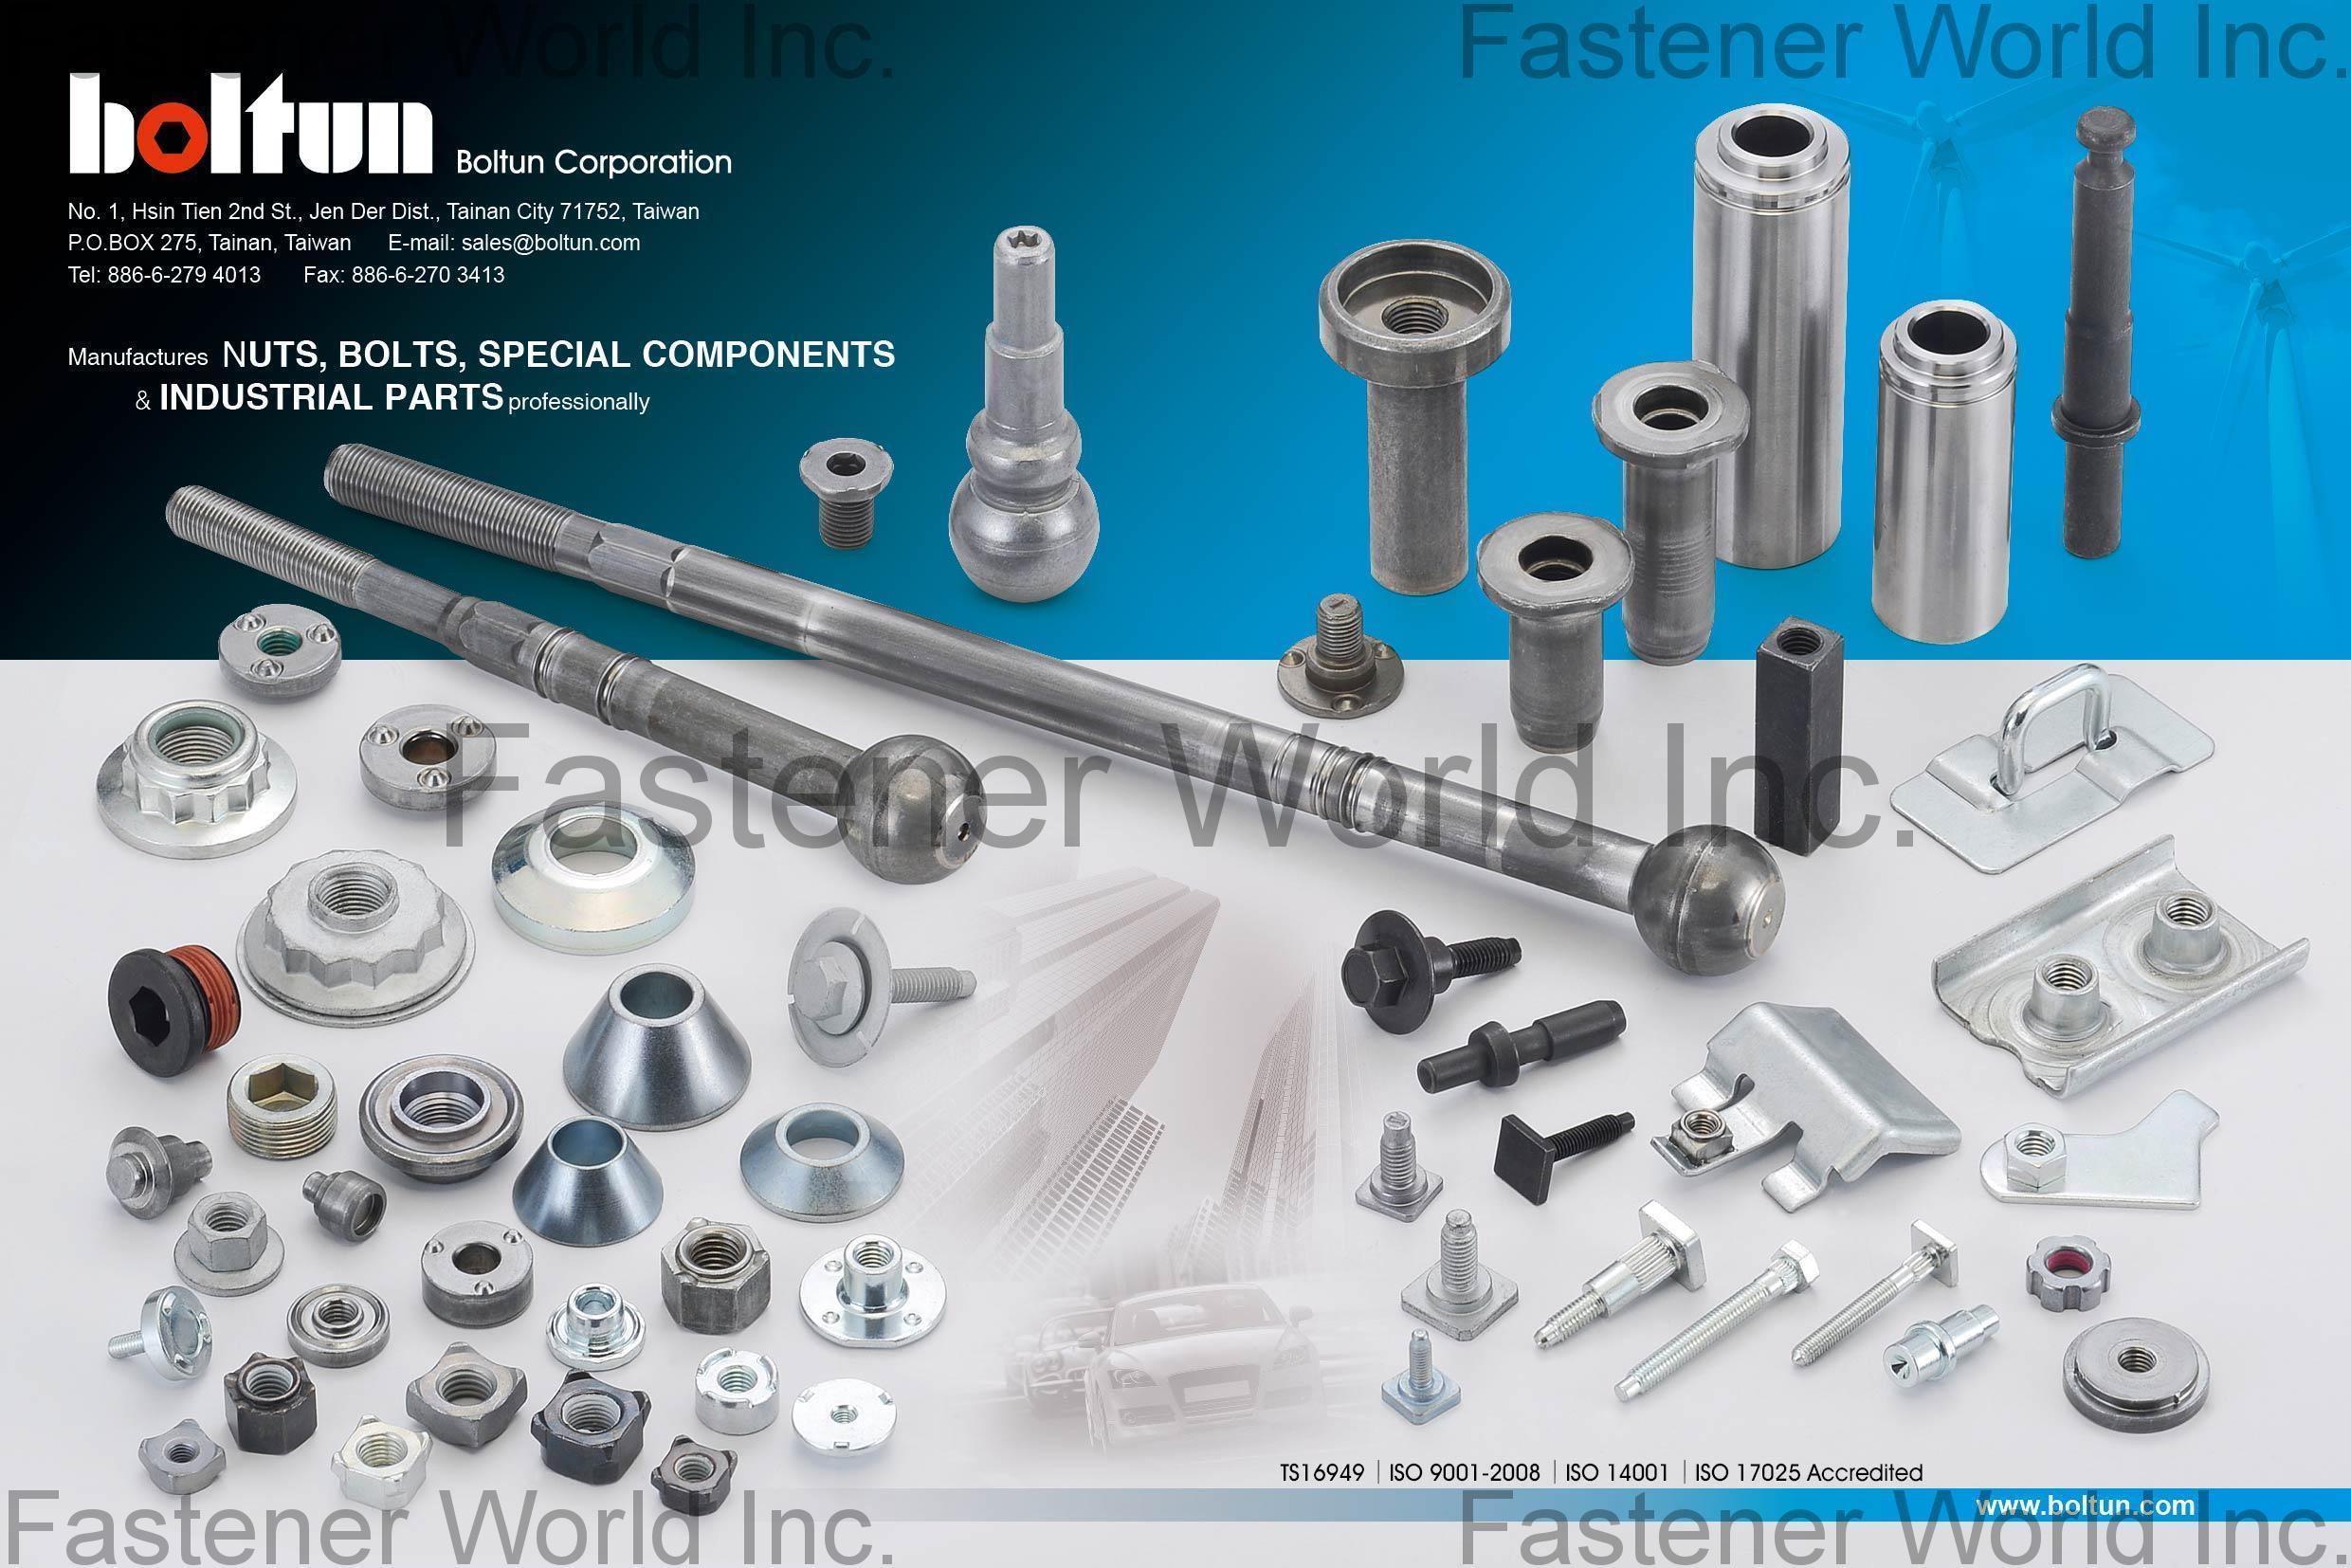 BOLTUN CORPORATION  , Welding Nuts,Rivet Nuts,Clinch Nuts,Locking Nuts,Nylon Insert Nuts,Conical Washer Nuts,T-Nuts,CNC Machining Parts,Stamping Parts,Bushed & Sleeves,Assembly Components,Special Parts,HEX. Bolt & Screw,Flange Bolt,Socket,Sems,Screw With Welding Projection,Screw With Welding Ring & Points,Clinch Bolt,T C Bolt,Special Pin,Wheel Bolt,Rail Bolt,Rail Bolts Construction Fasteners: Nuts, Screws & Washers,Wind Turbine Fasteners Kits: Nuts, Bolts & Washers Truck Wheel Bolts,Bolts & Nuts & Components,Motorcycle parts,Nylon rings & special washer,Expansion Bolt , Weld Nuts